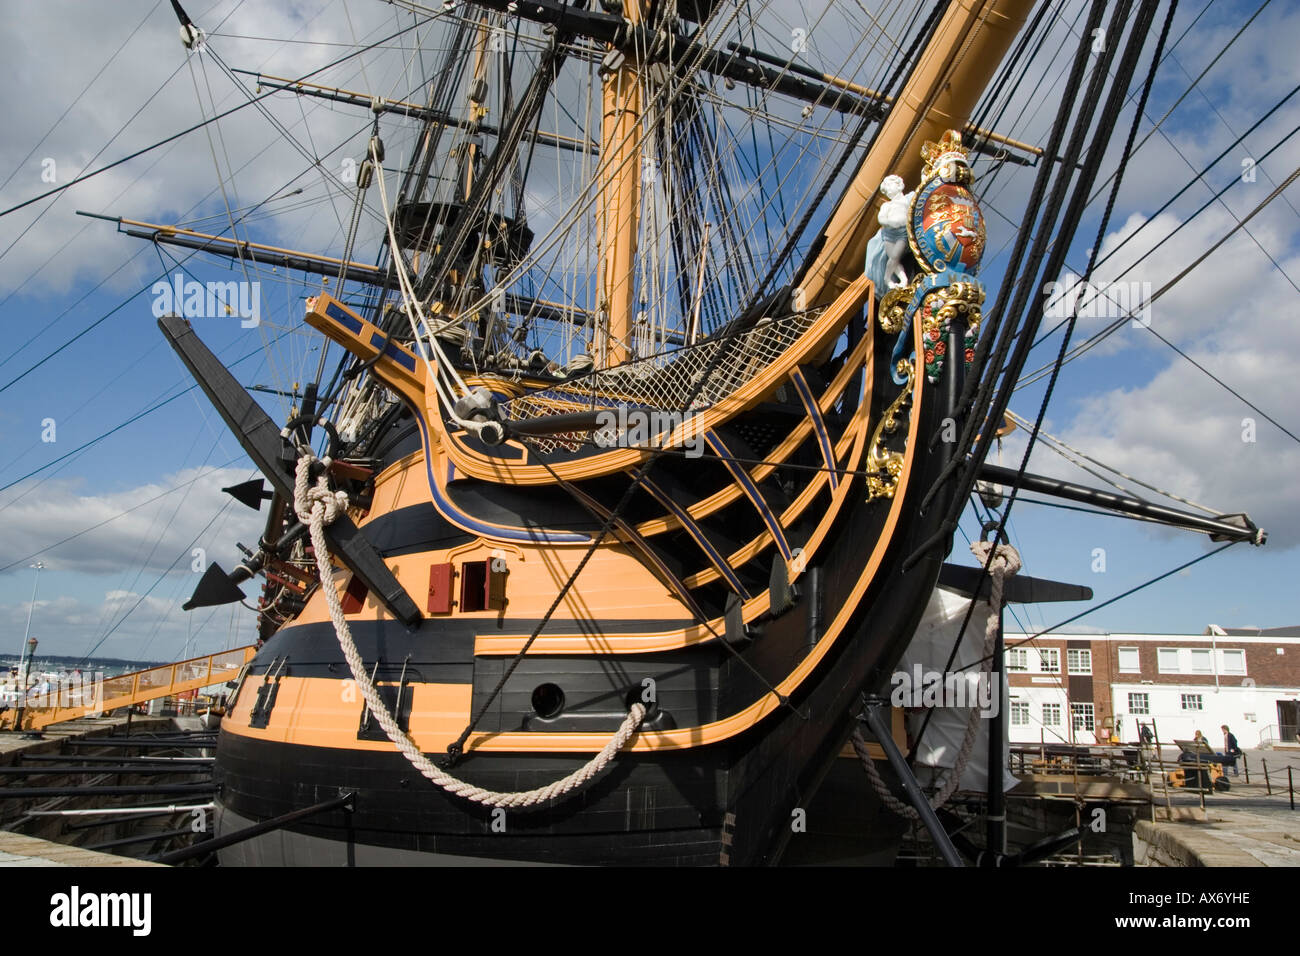 https://c8.alamy.com/comp/AX6YHE/bow-of-hms-victory-city-of-portsmouth-hampshire-england-uk-AX6YHE.jpg